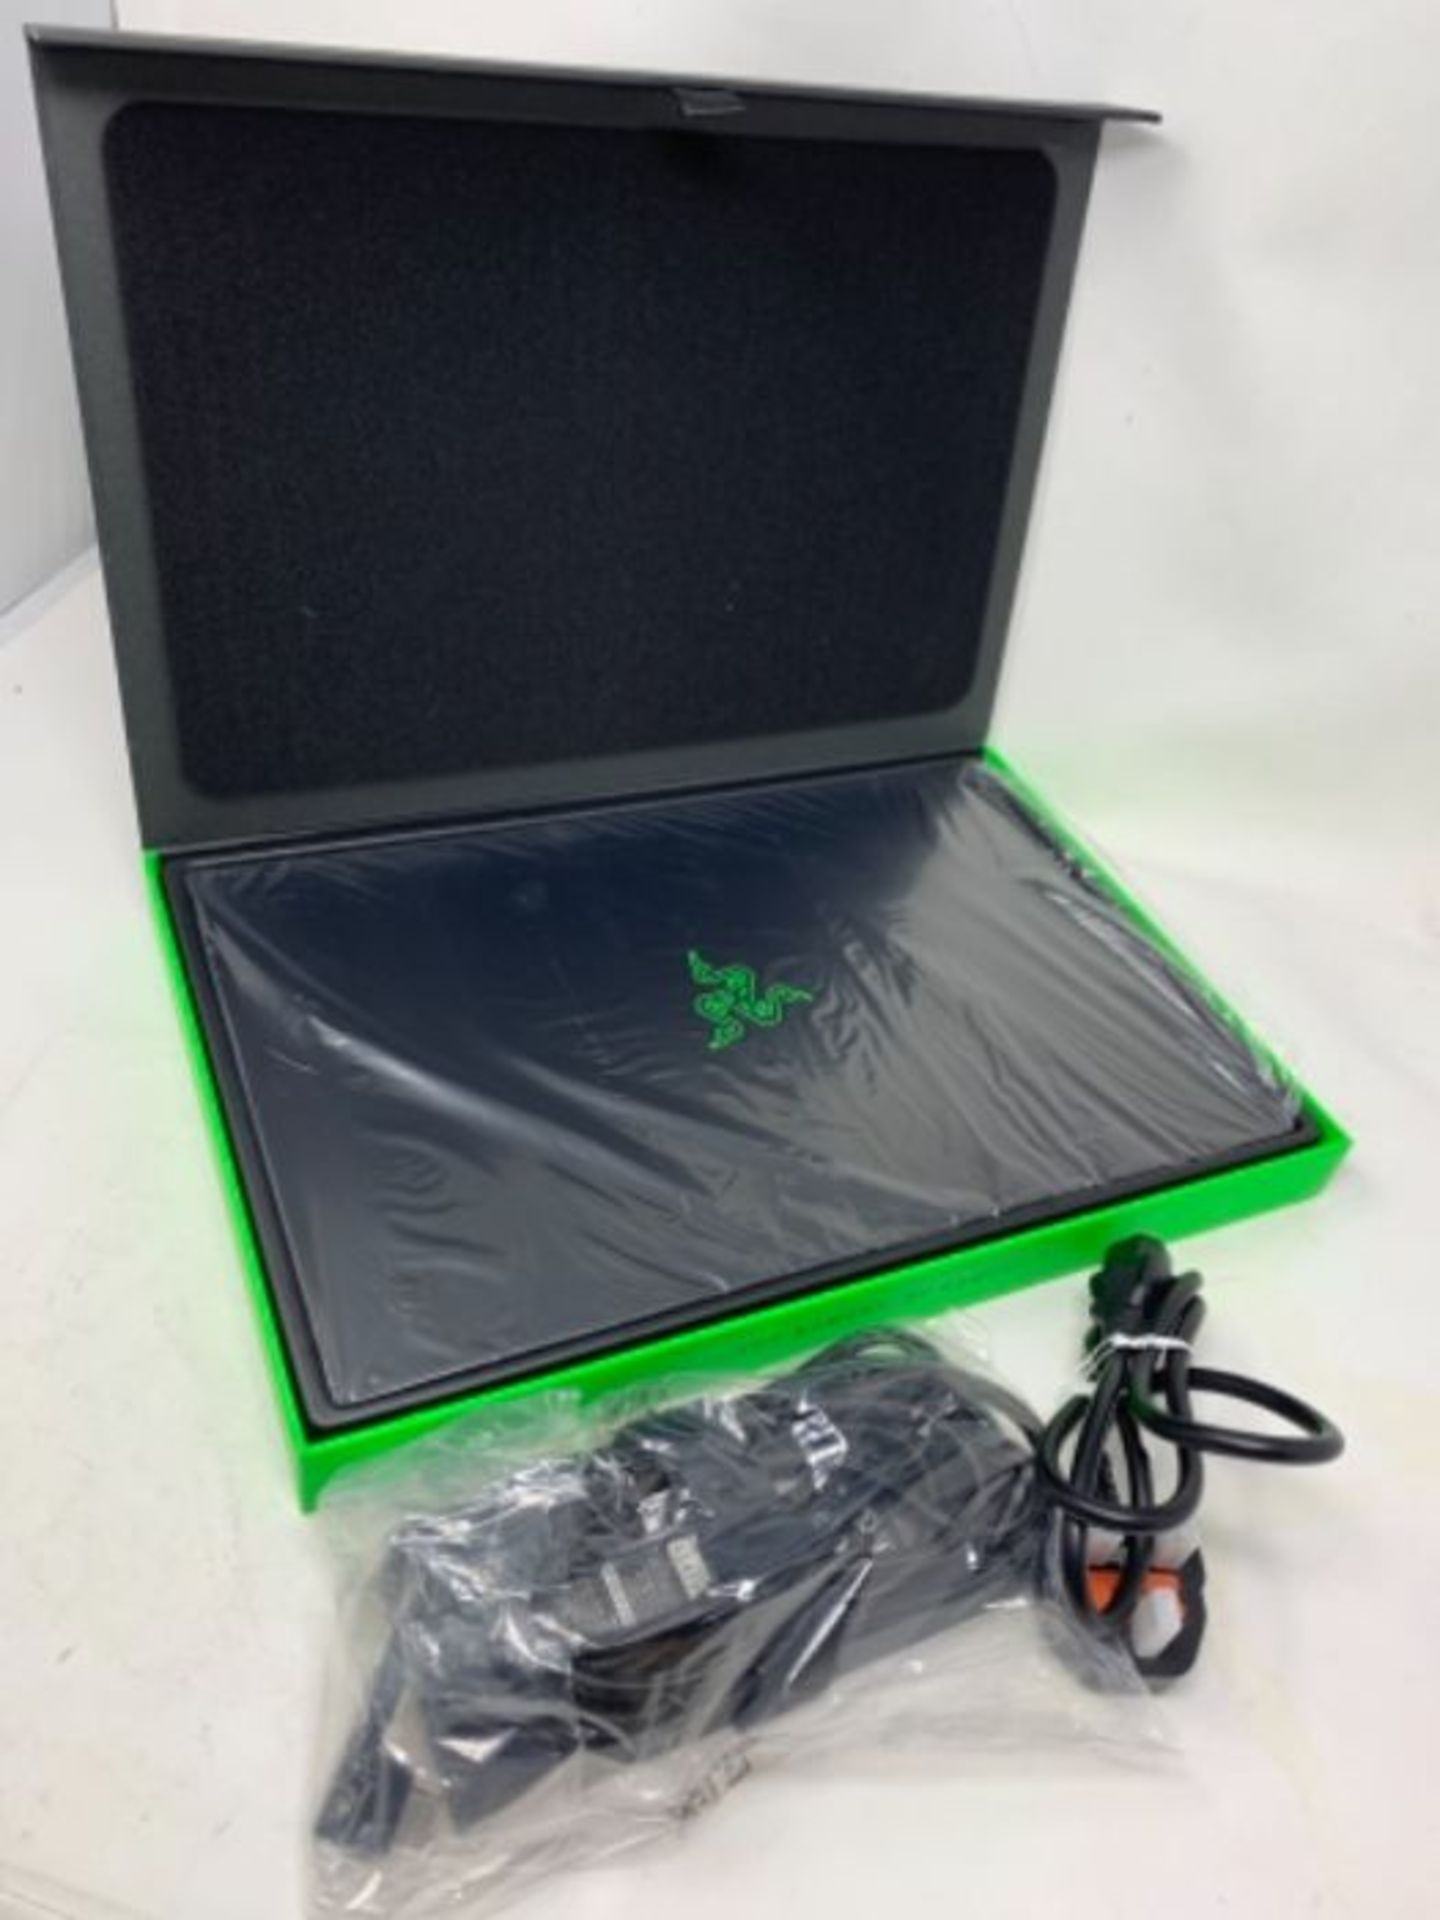 RRP £2359.00 AS NEW - Razer Blade 15 Advanced Model 2019 (15.6 Inch Full-HD Display) Gaming Noteboo - Image 3 of 3